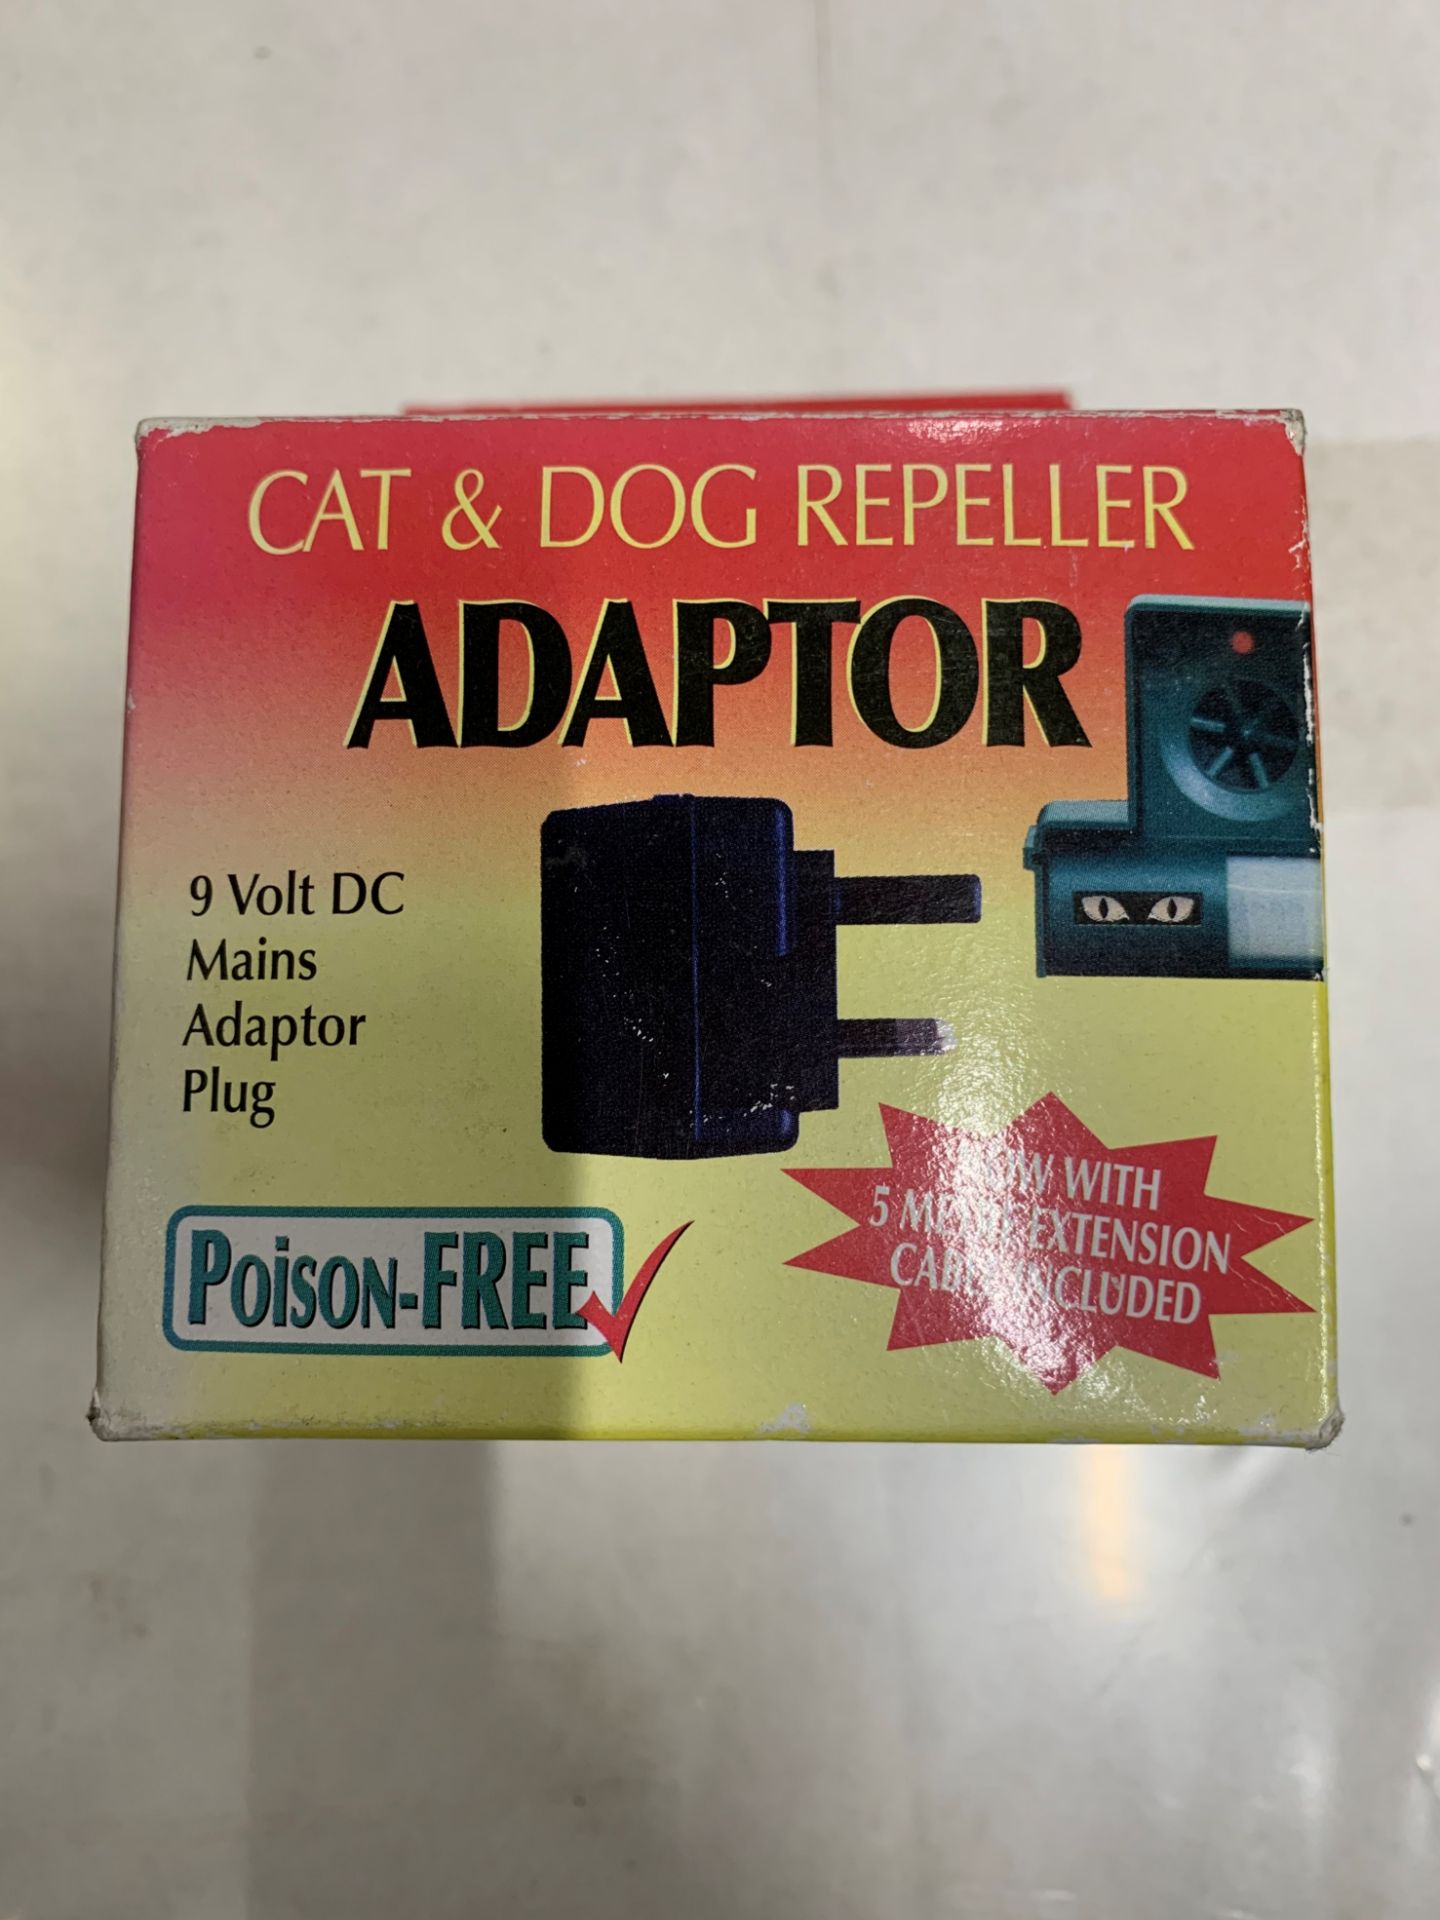 3 x Poison-free cat & dog repeller adaptor's - Image 2 of 2